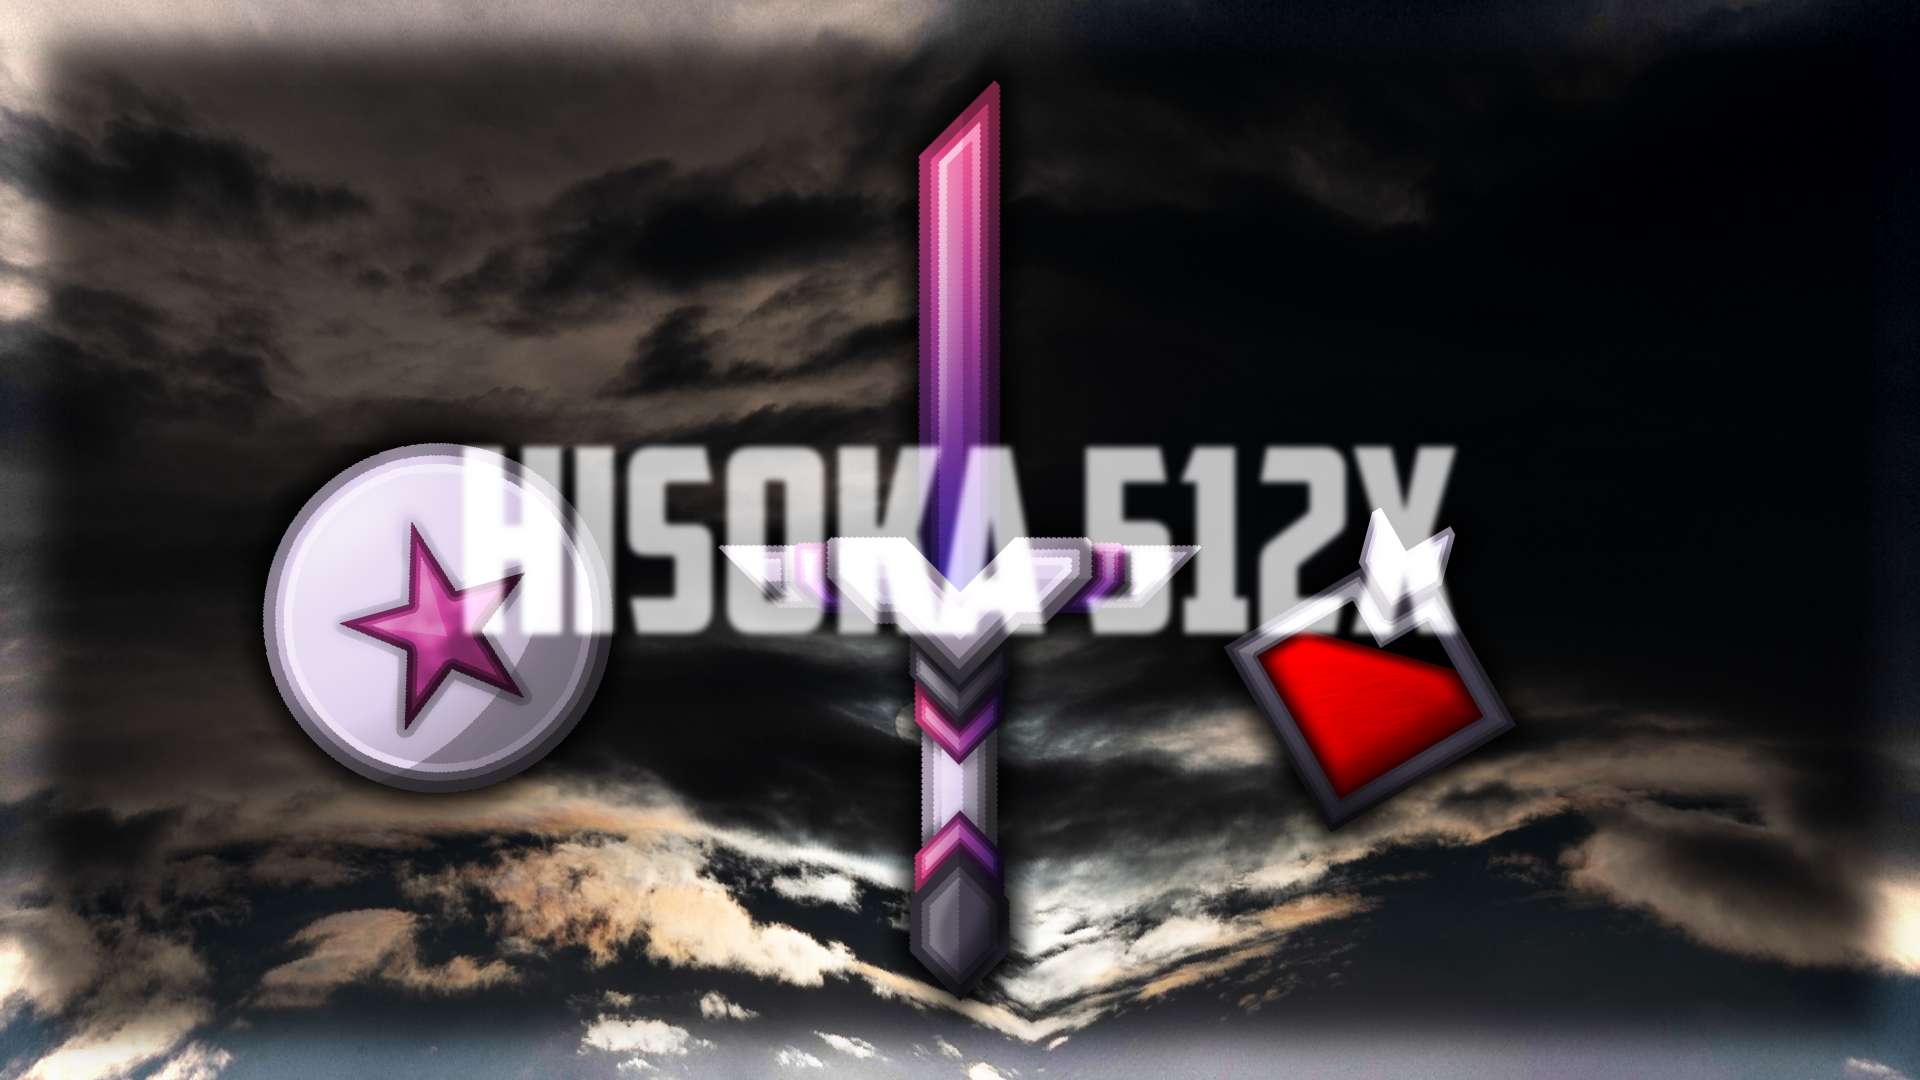 Gallery Banner for Hisoka on PvPRP